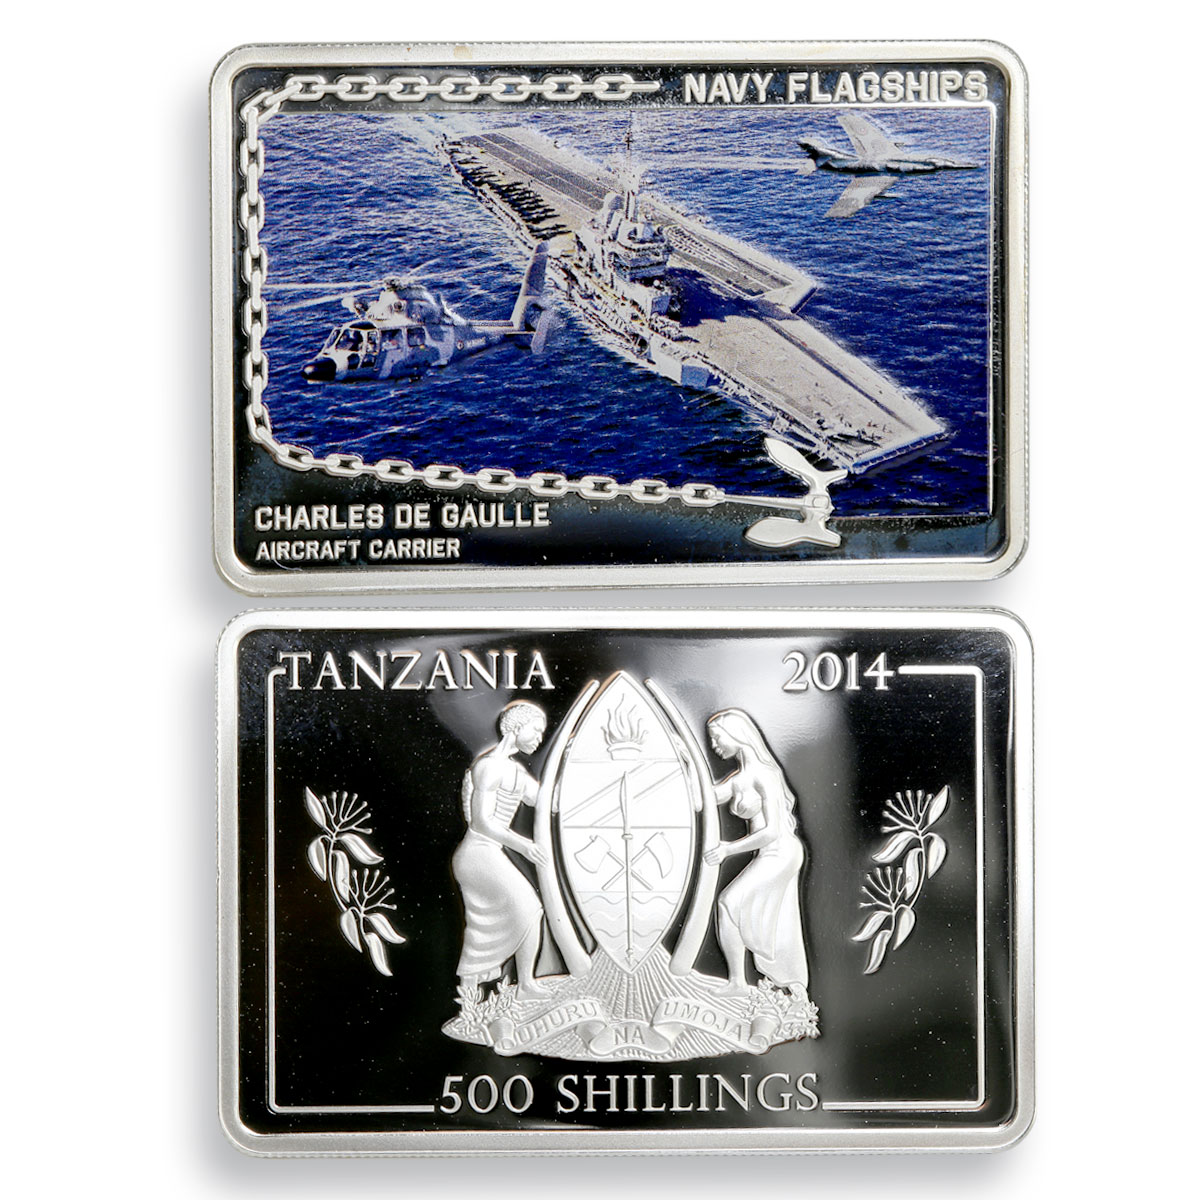 Tanzania set 4 coins Navy Flagships colored proof silver coin 2014